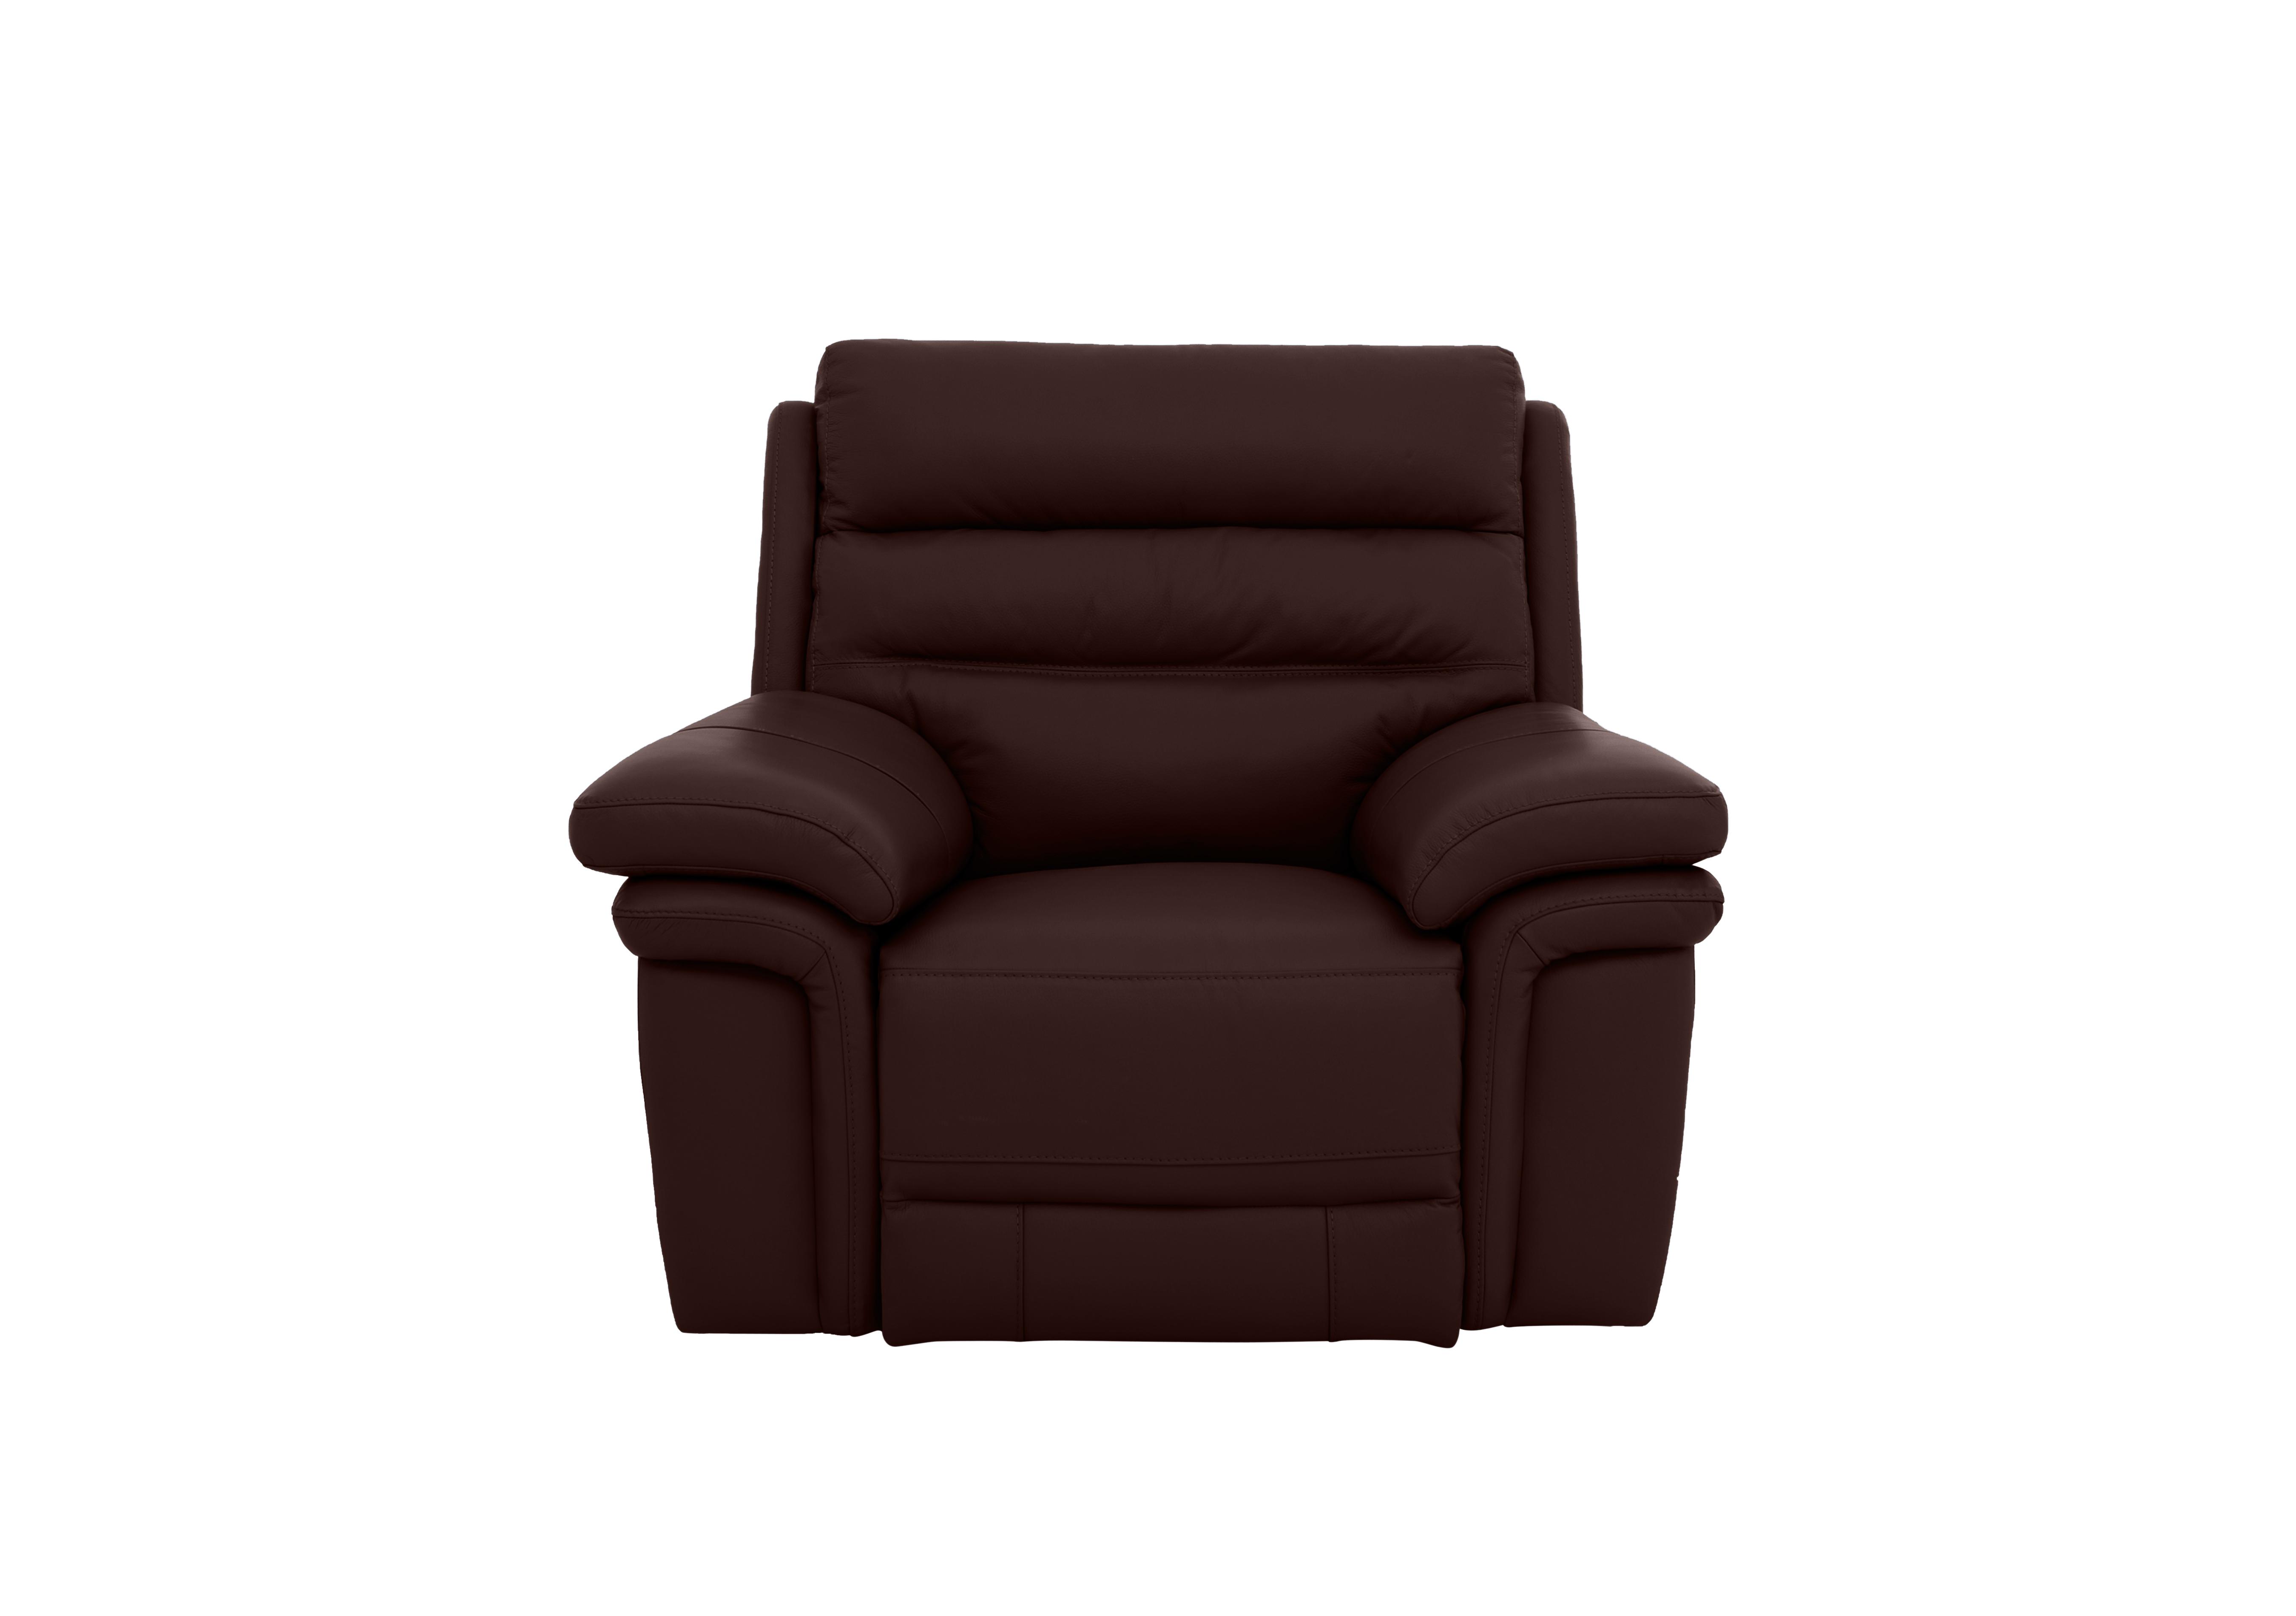 Berlin Leather Chair in Burgundy Lx-6402 on Furniture Village